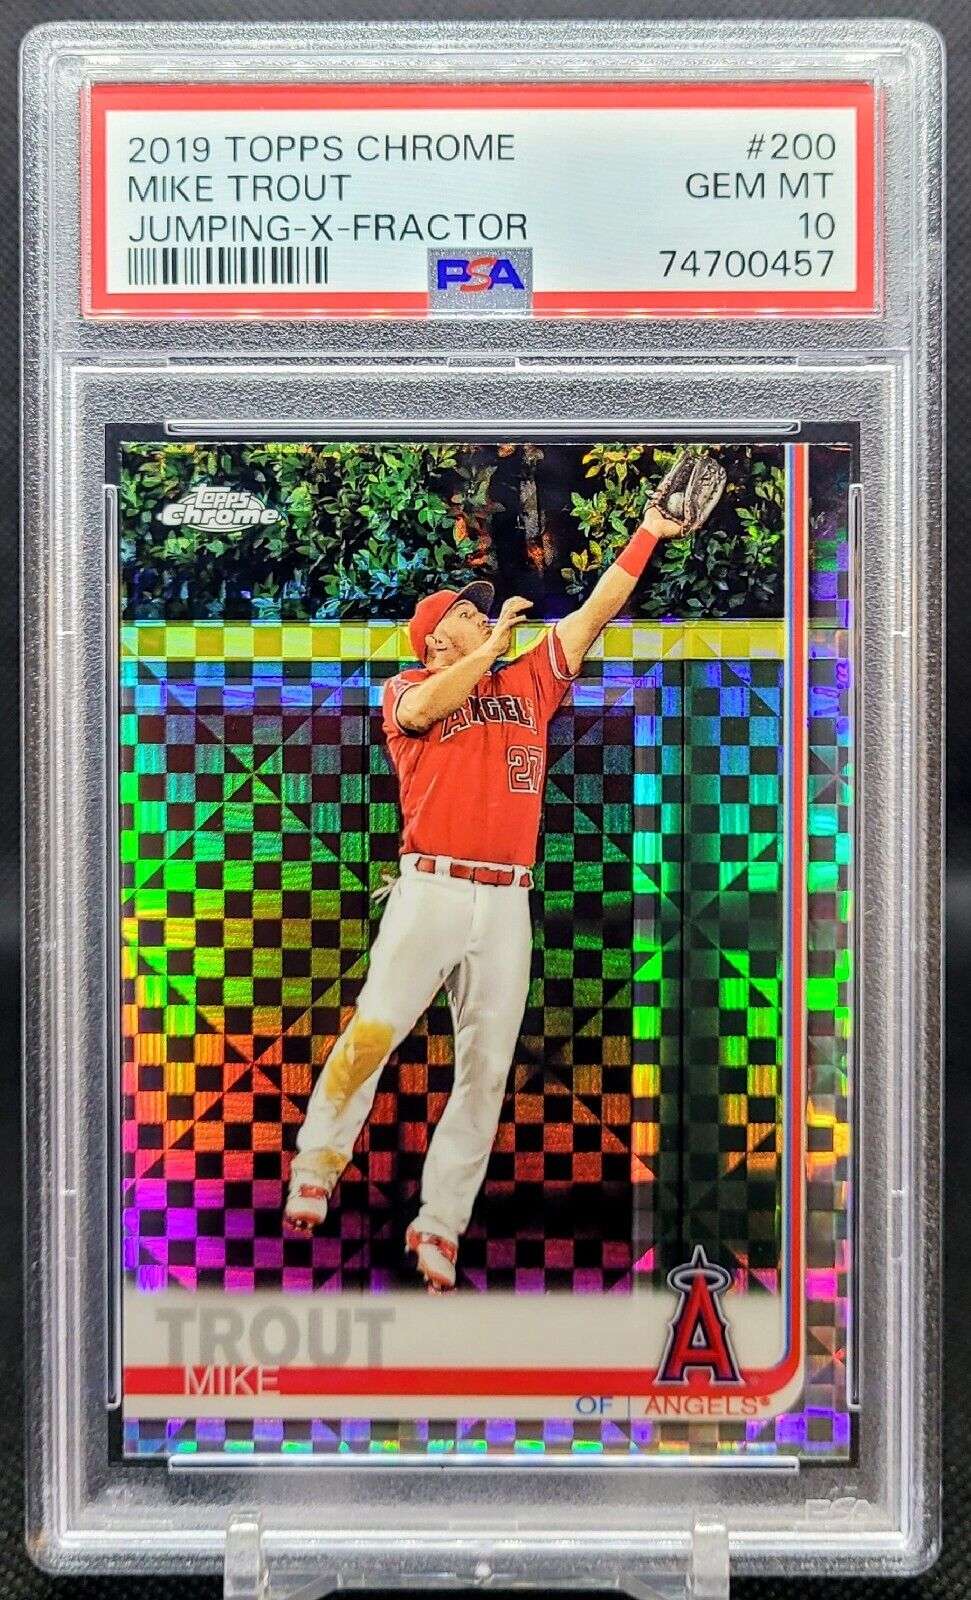 2019 Topps Chrome "Jumping Catch" X-fractor MIKE TROUT #200 PSA 10 Angels